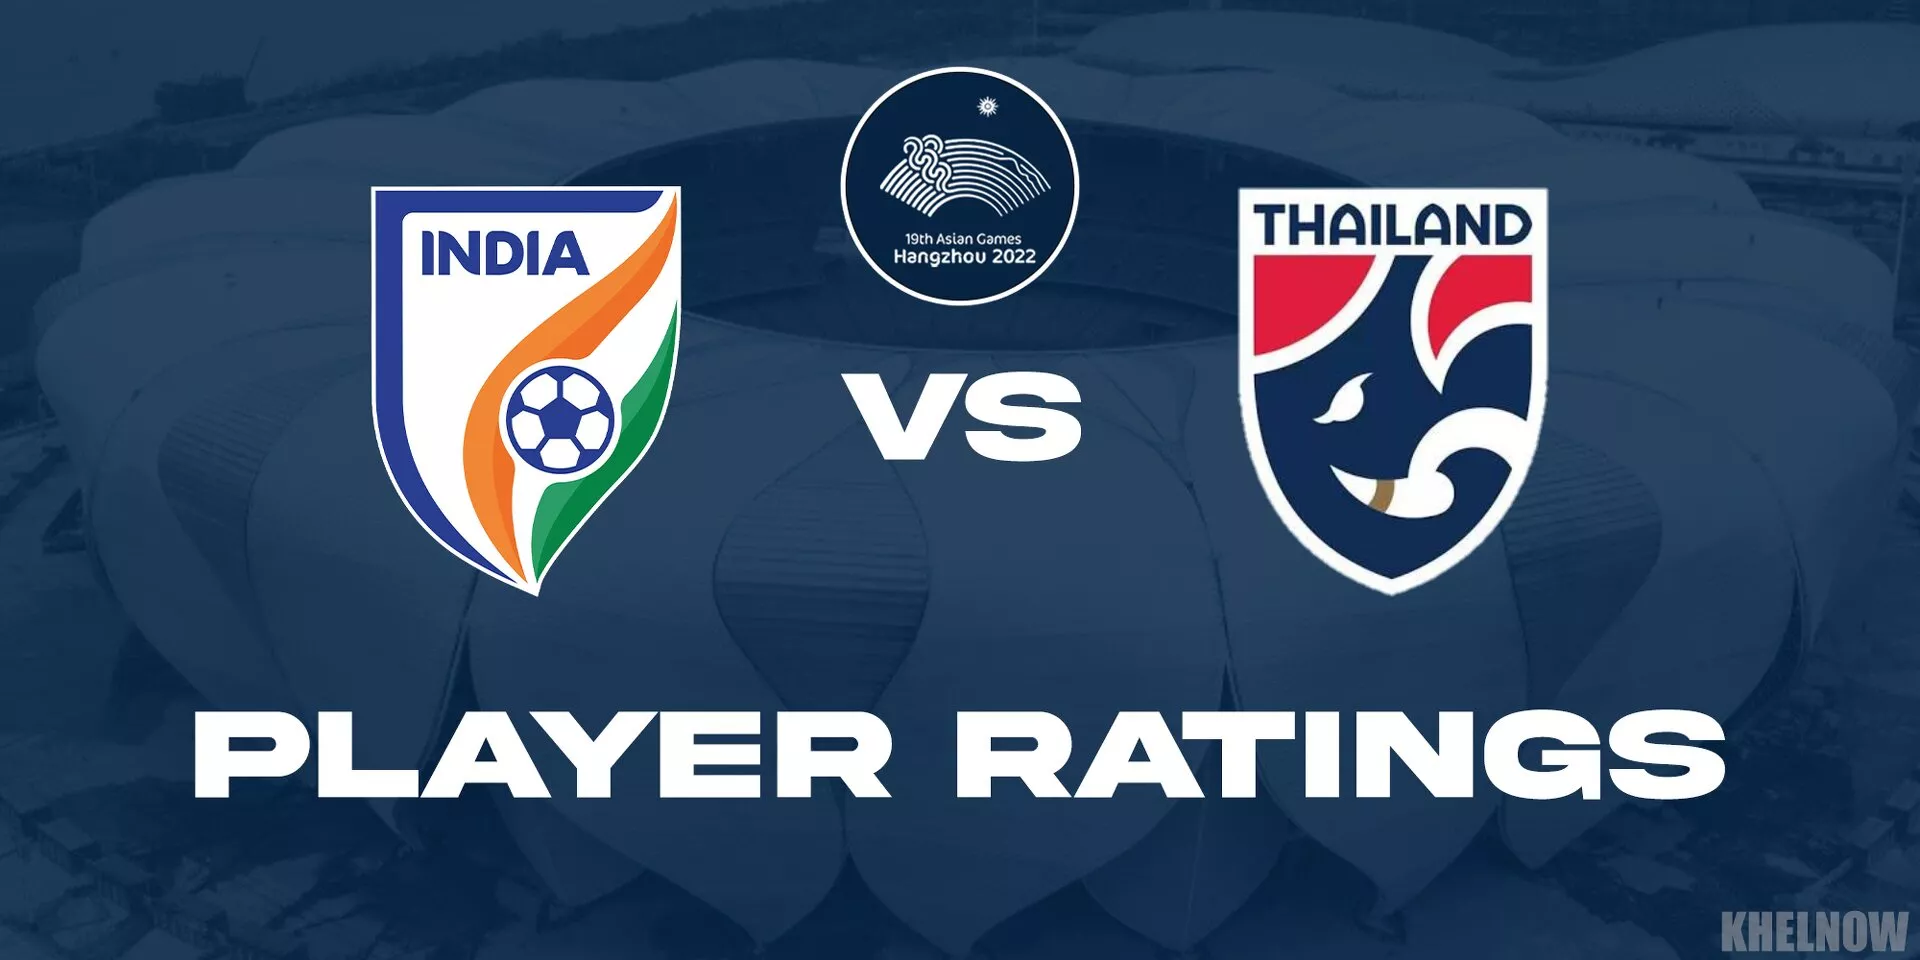 Ratings: India go down to Thailand, bow out from Asian Games